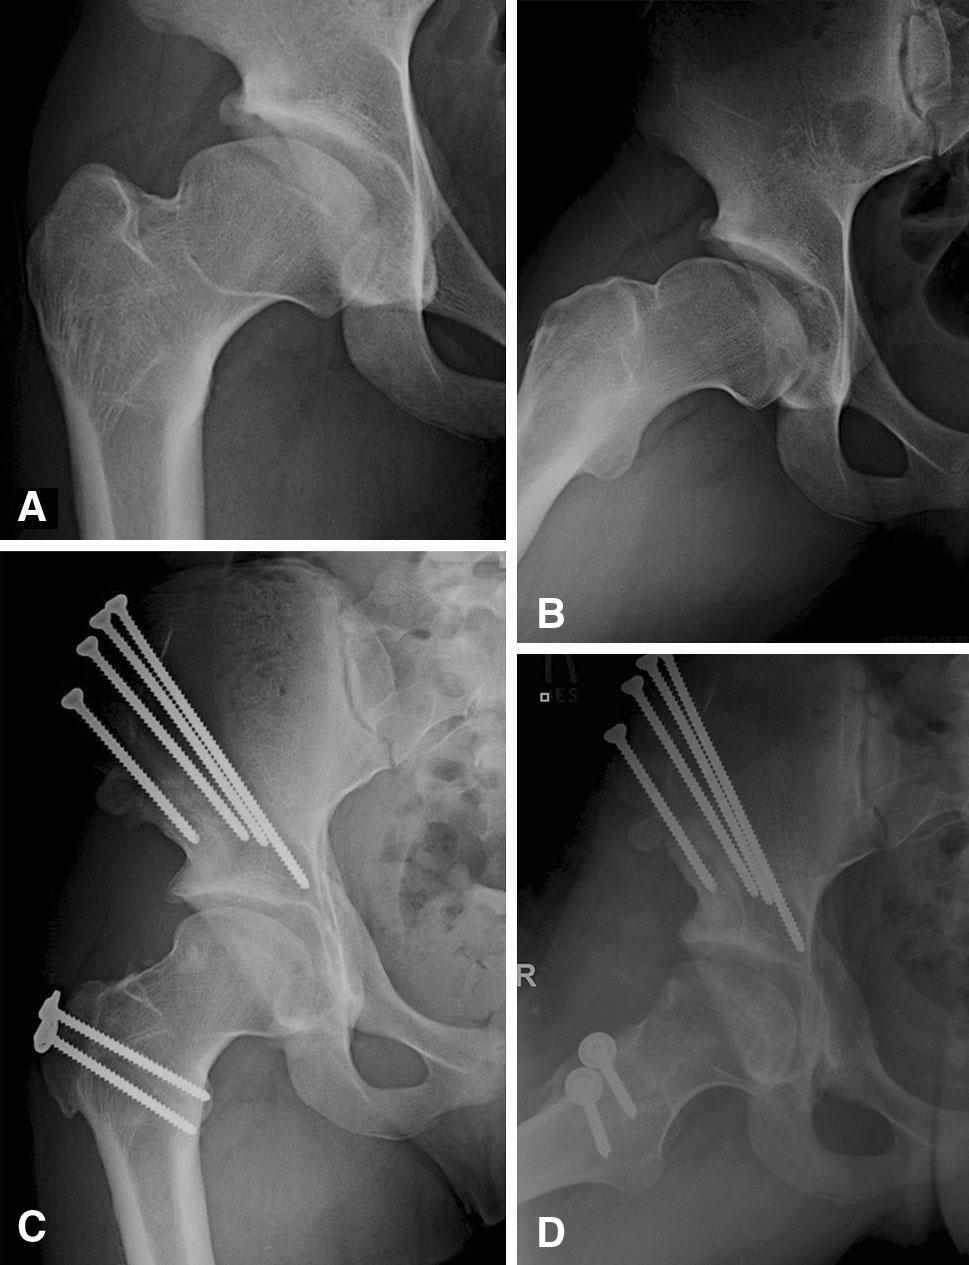 Volume 473, Number 4, April 2015 Surgical Dislocation and PAO 1373 Table 1.